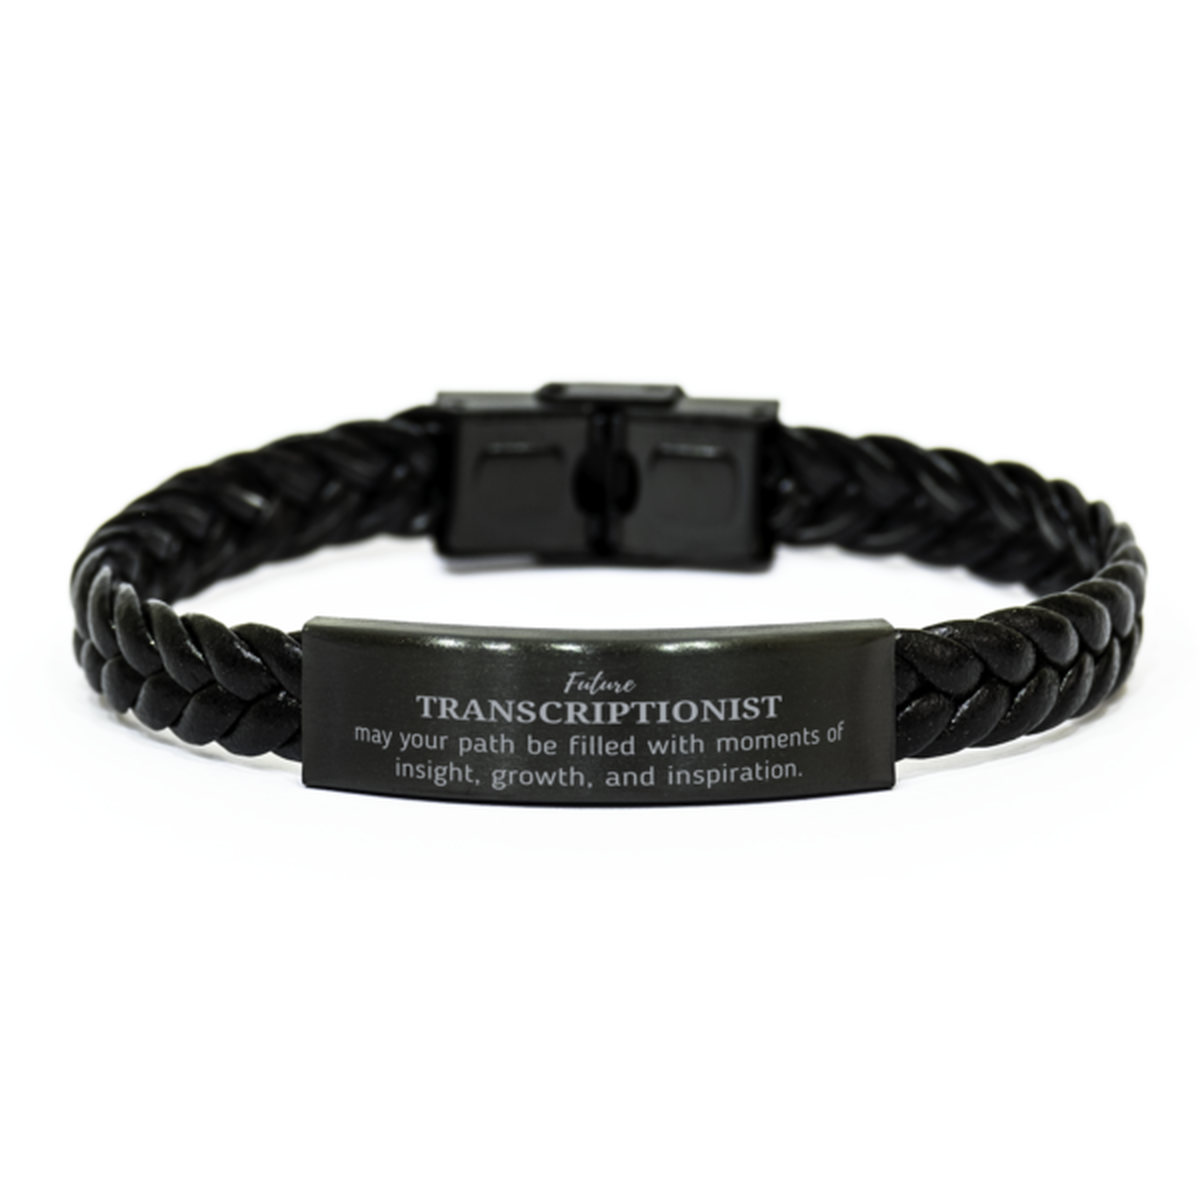 Future Transcriptionist Gifts, May your path be filled with moments of insight, Graduation Gifts for New Transcriptionist, Christmas Unique Braided Leather Bracelet For Men, Women, Friends